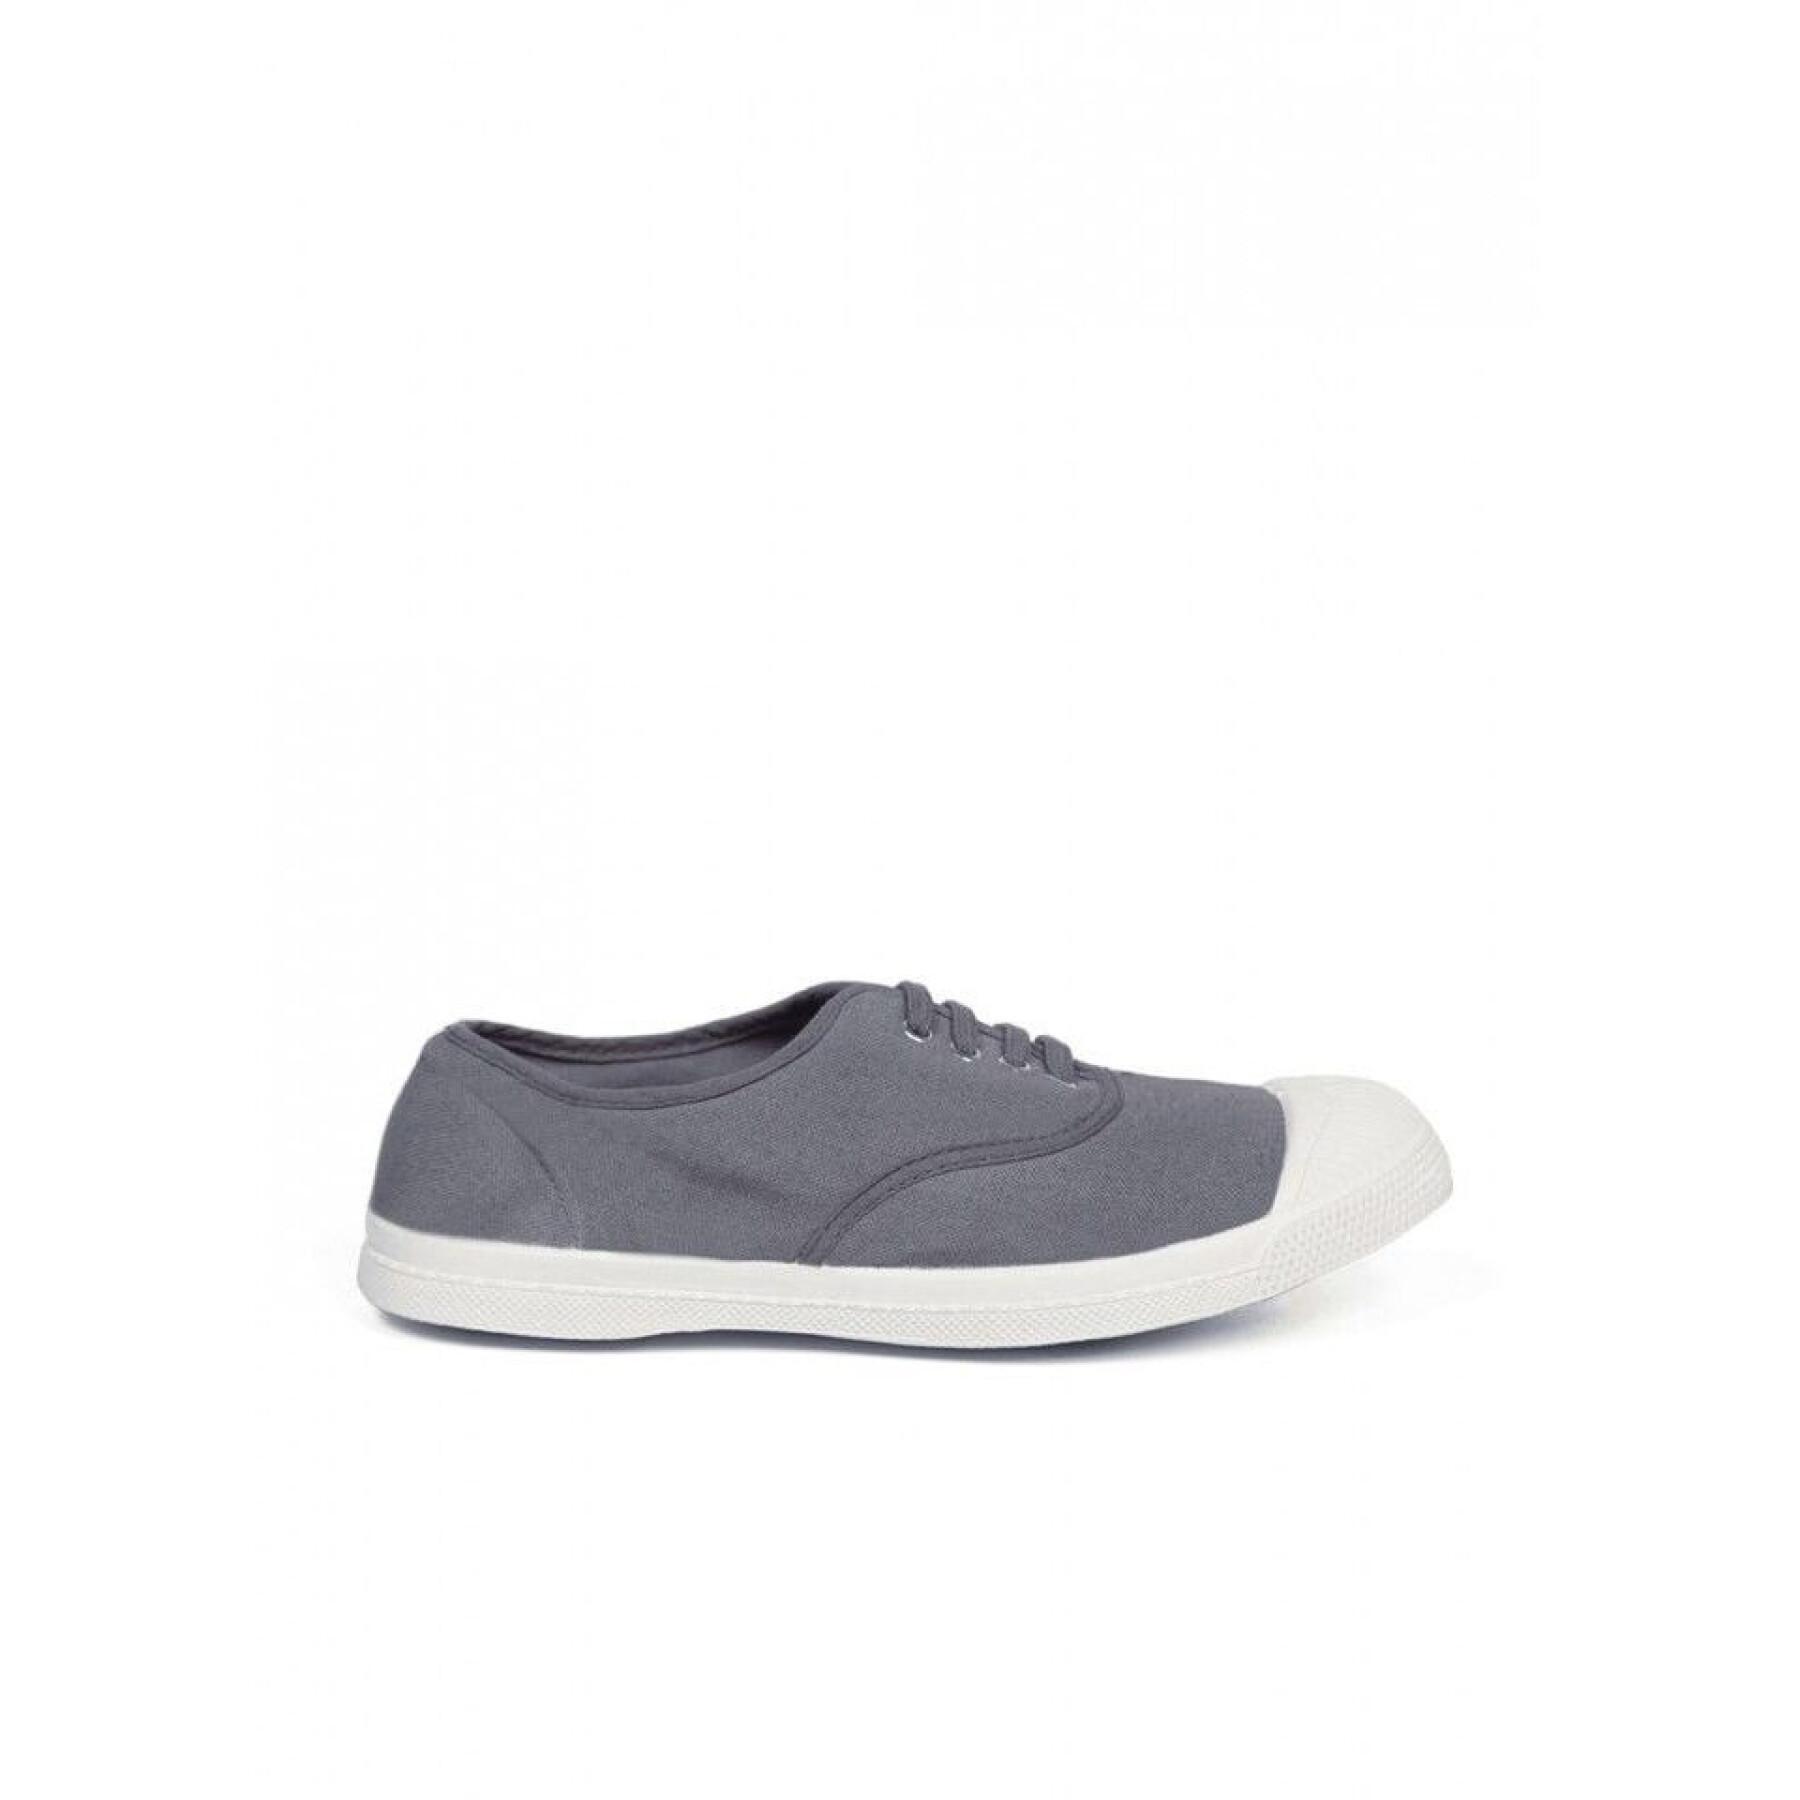 Women's lace-up sneakers Bensimon